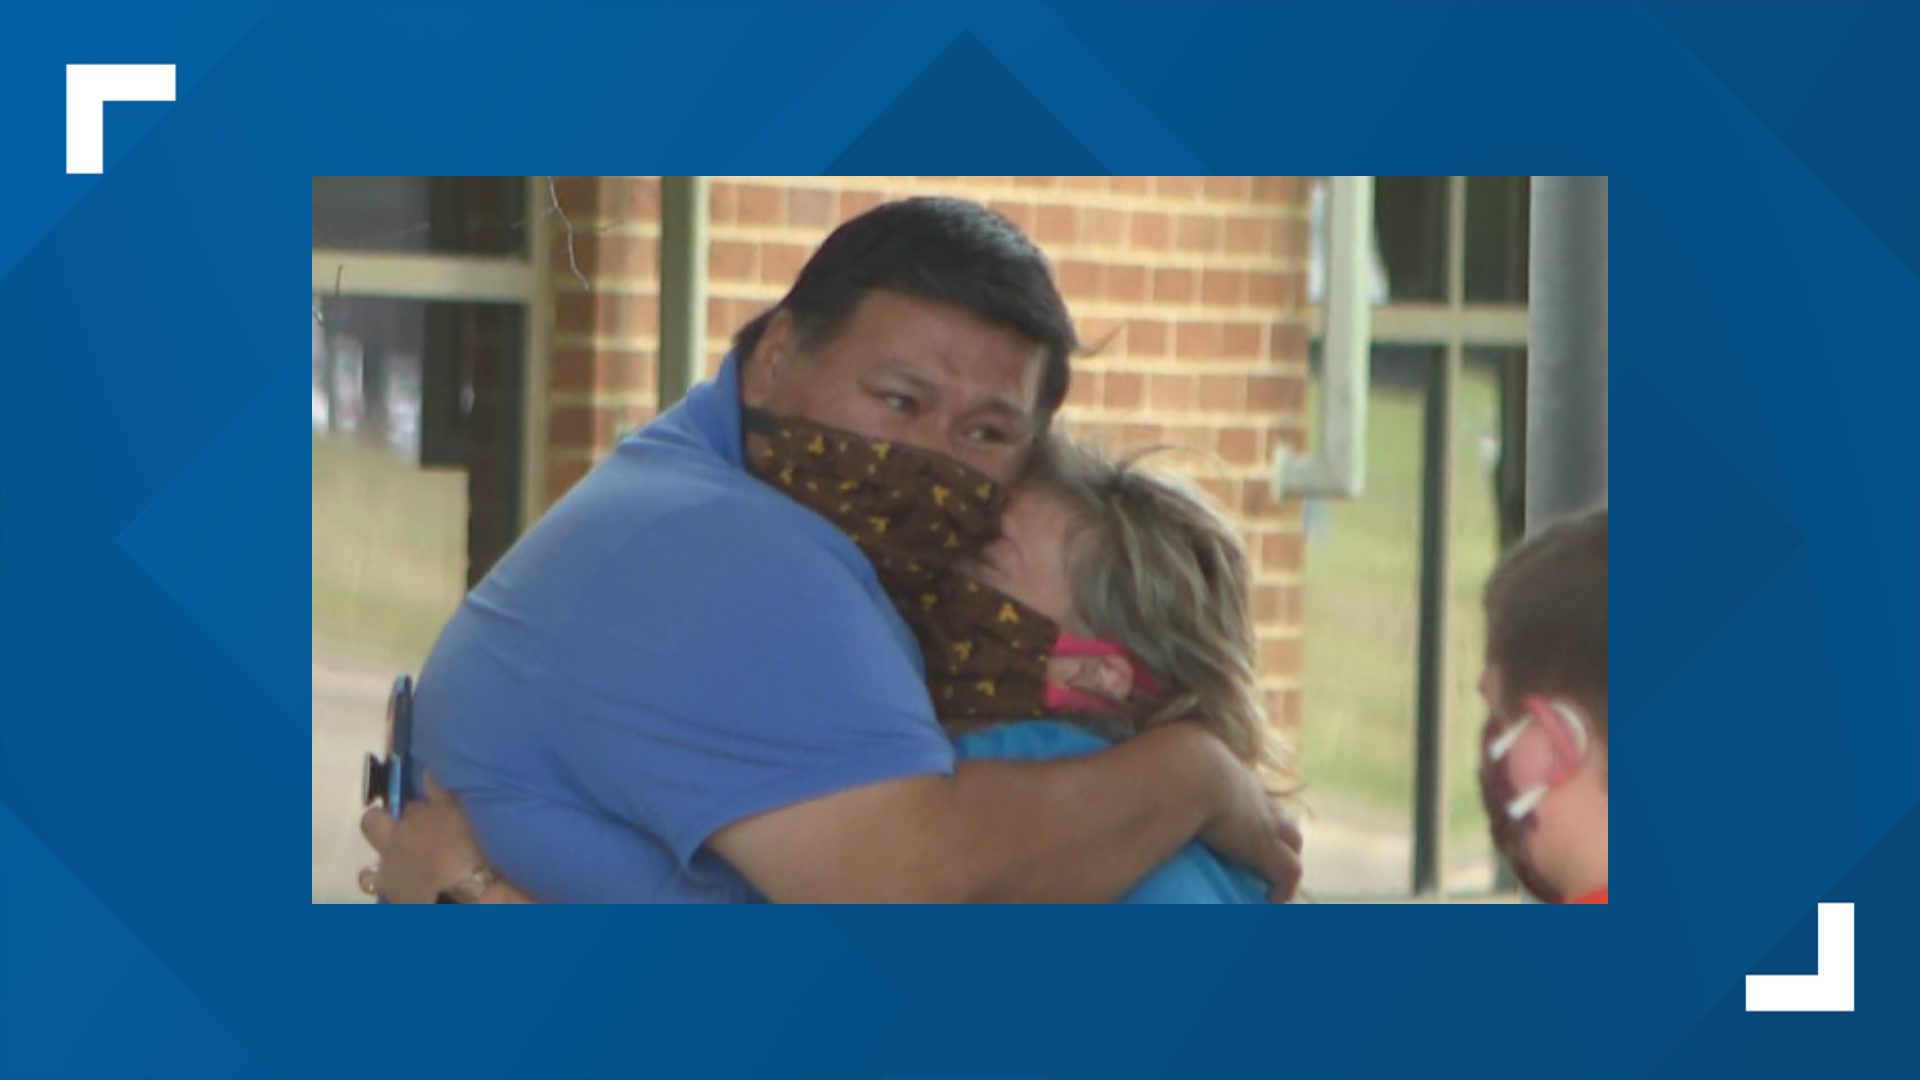 Domingo and Lori Montalbo were able to finally hug after 40 days of being apart.